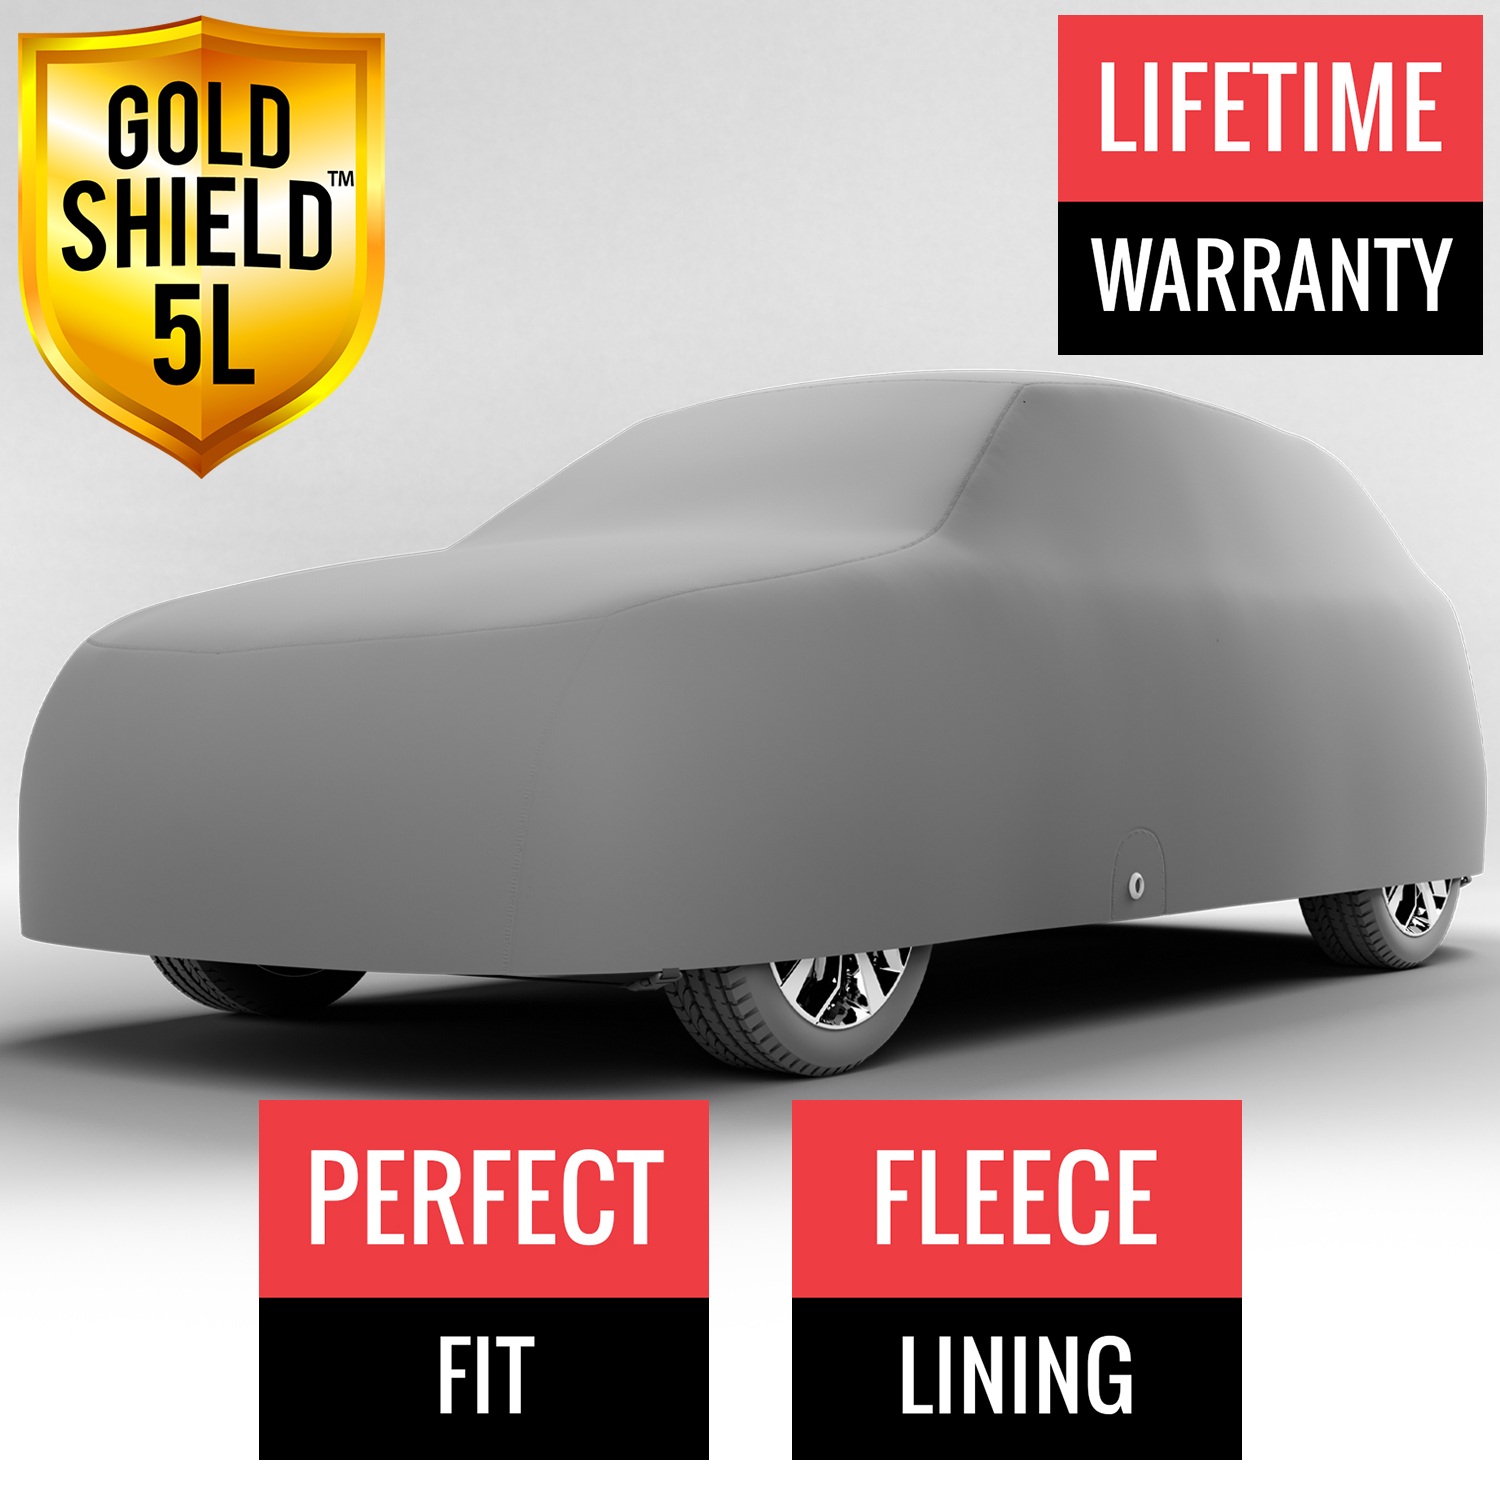 Gold Shield 5L - Car Cover for Toyota Prius V 2018 Wagon 4-Door